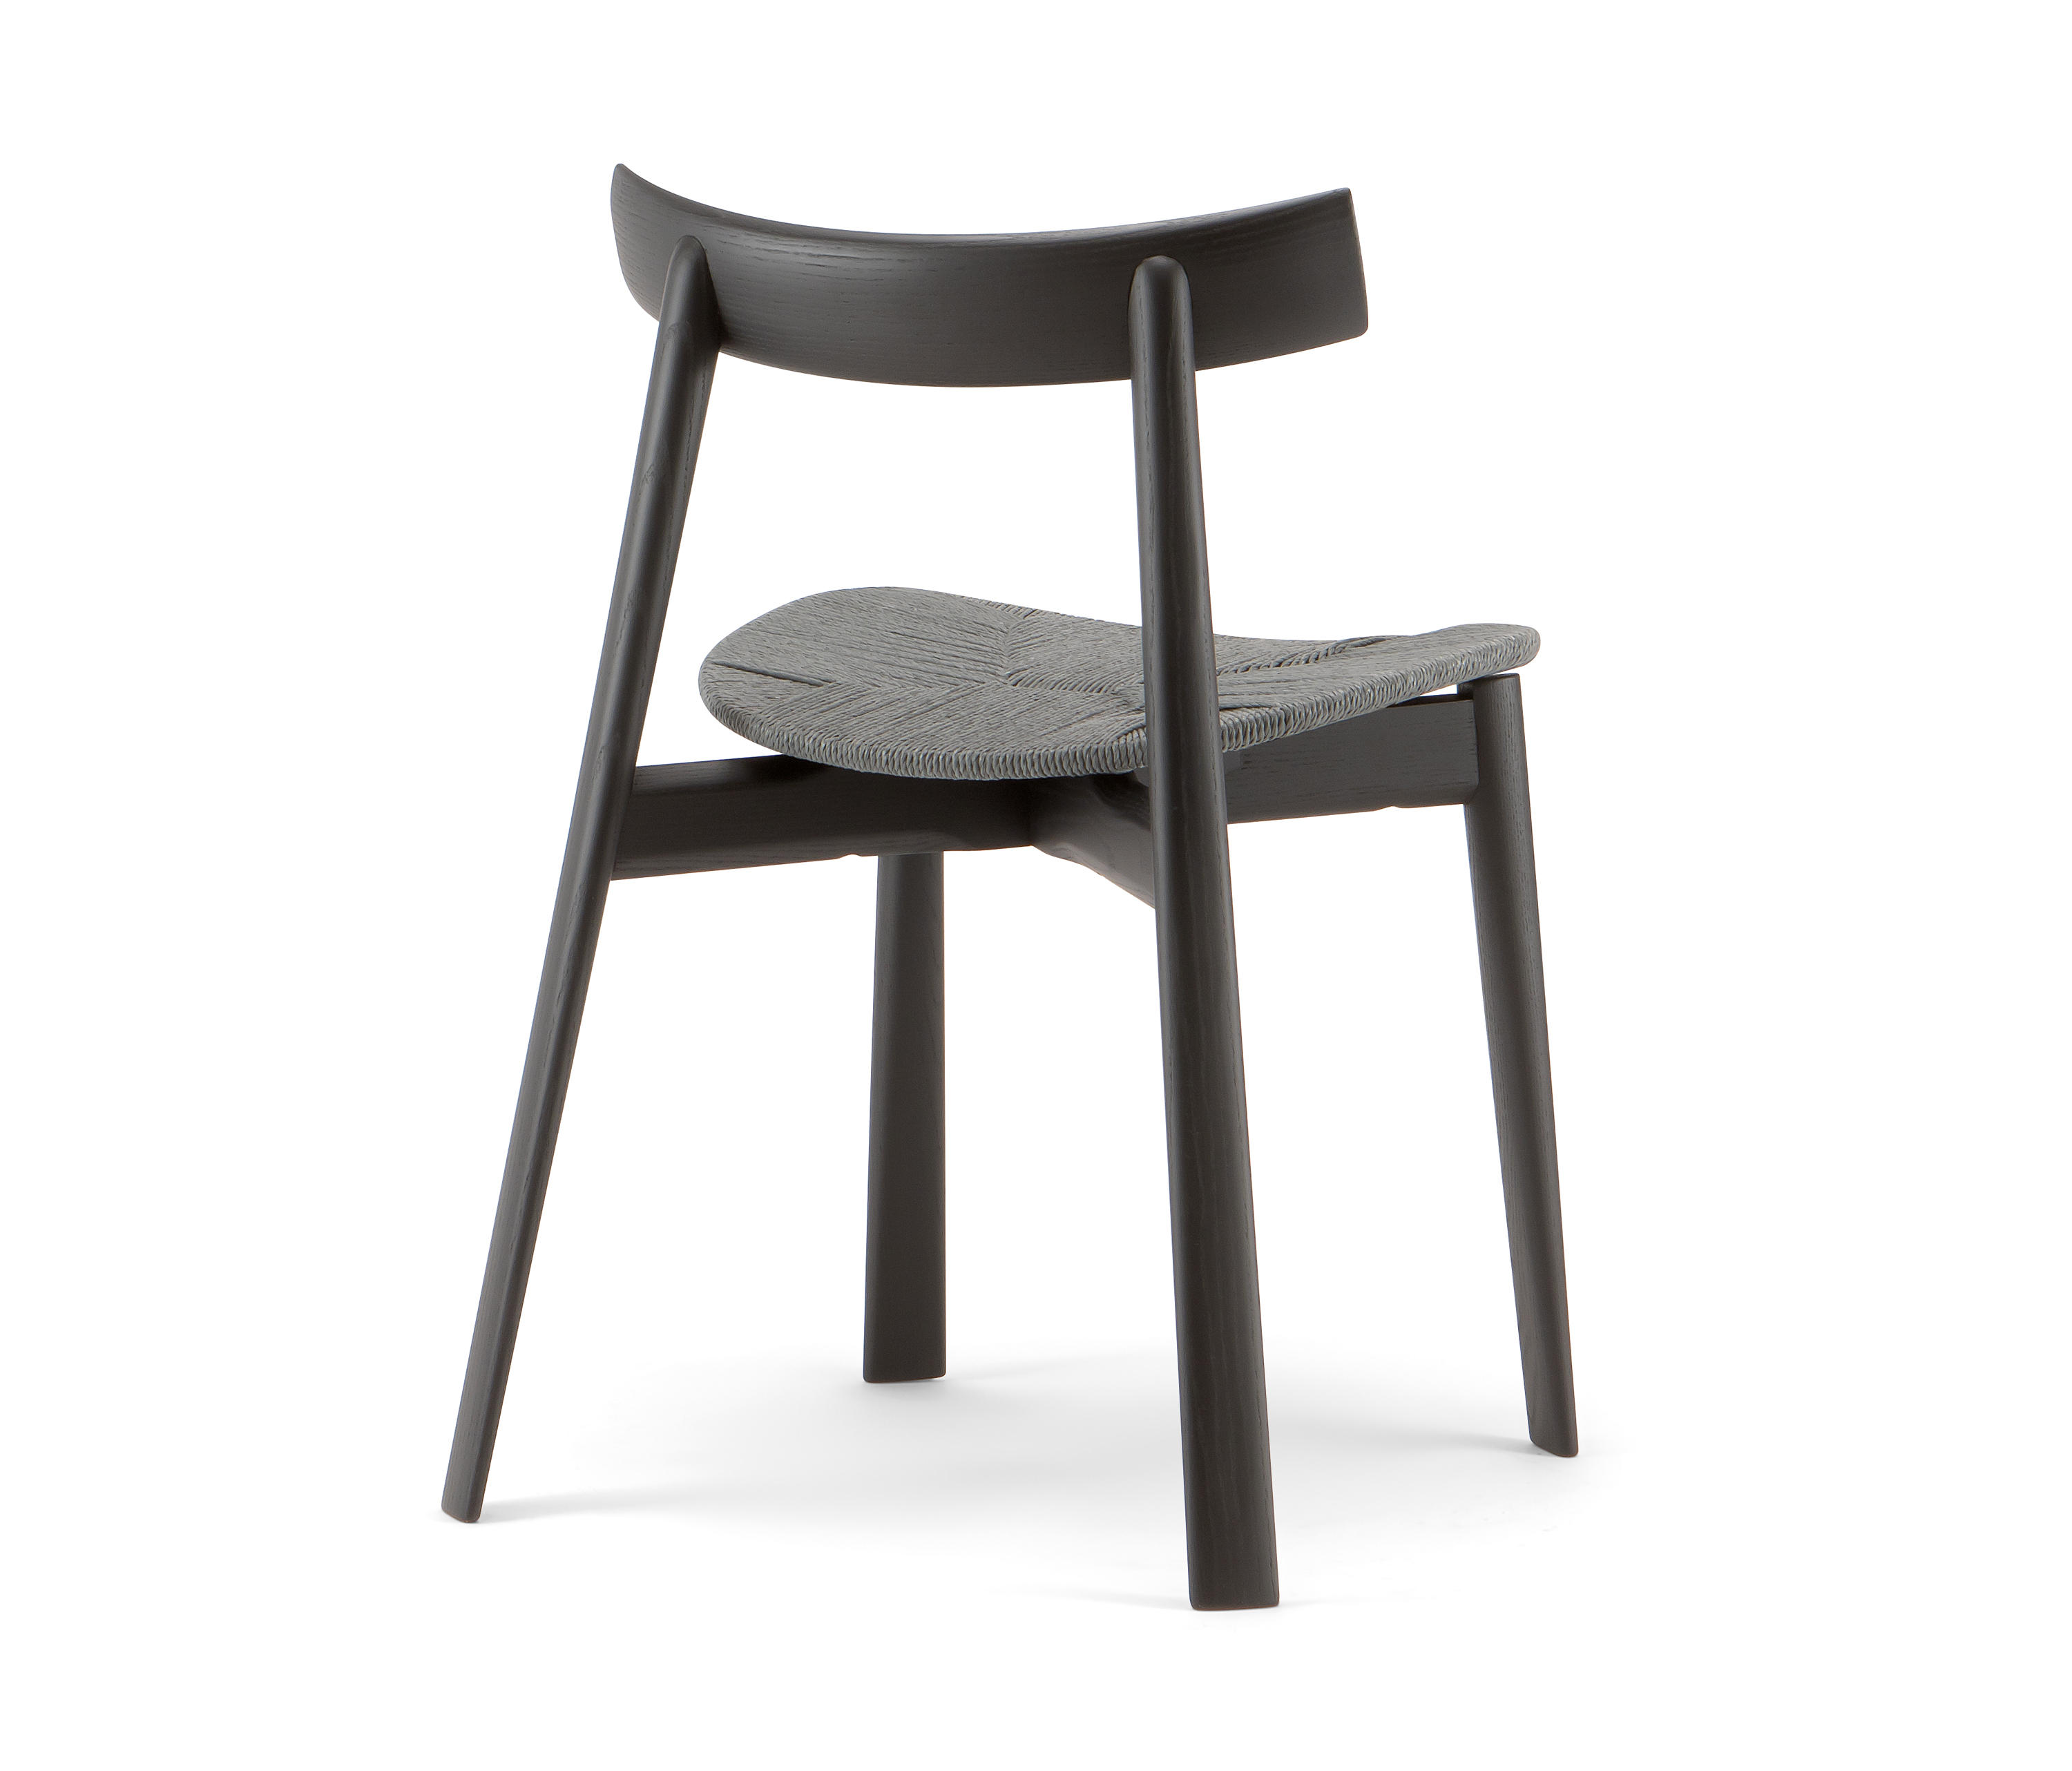 REMO 2201 SE - Chairs from Cizeta | Architonic